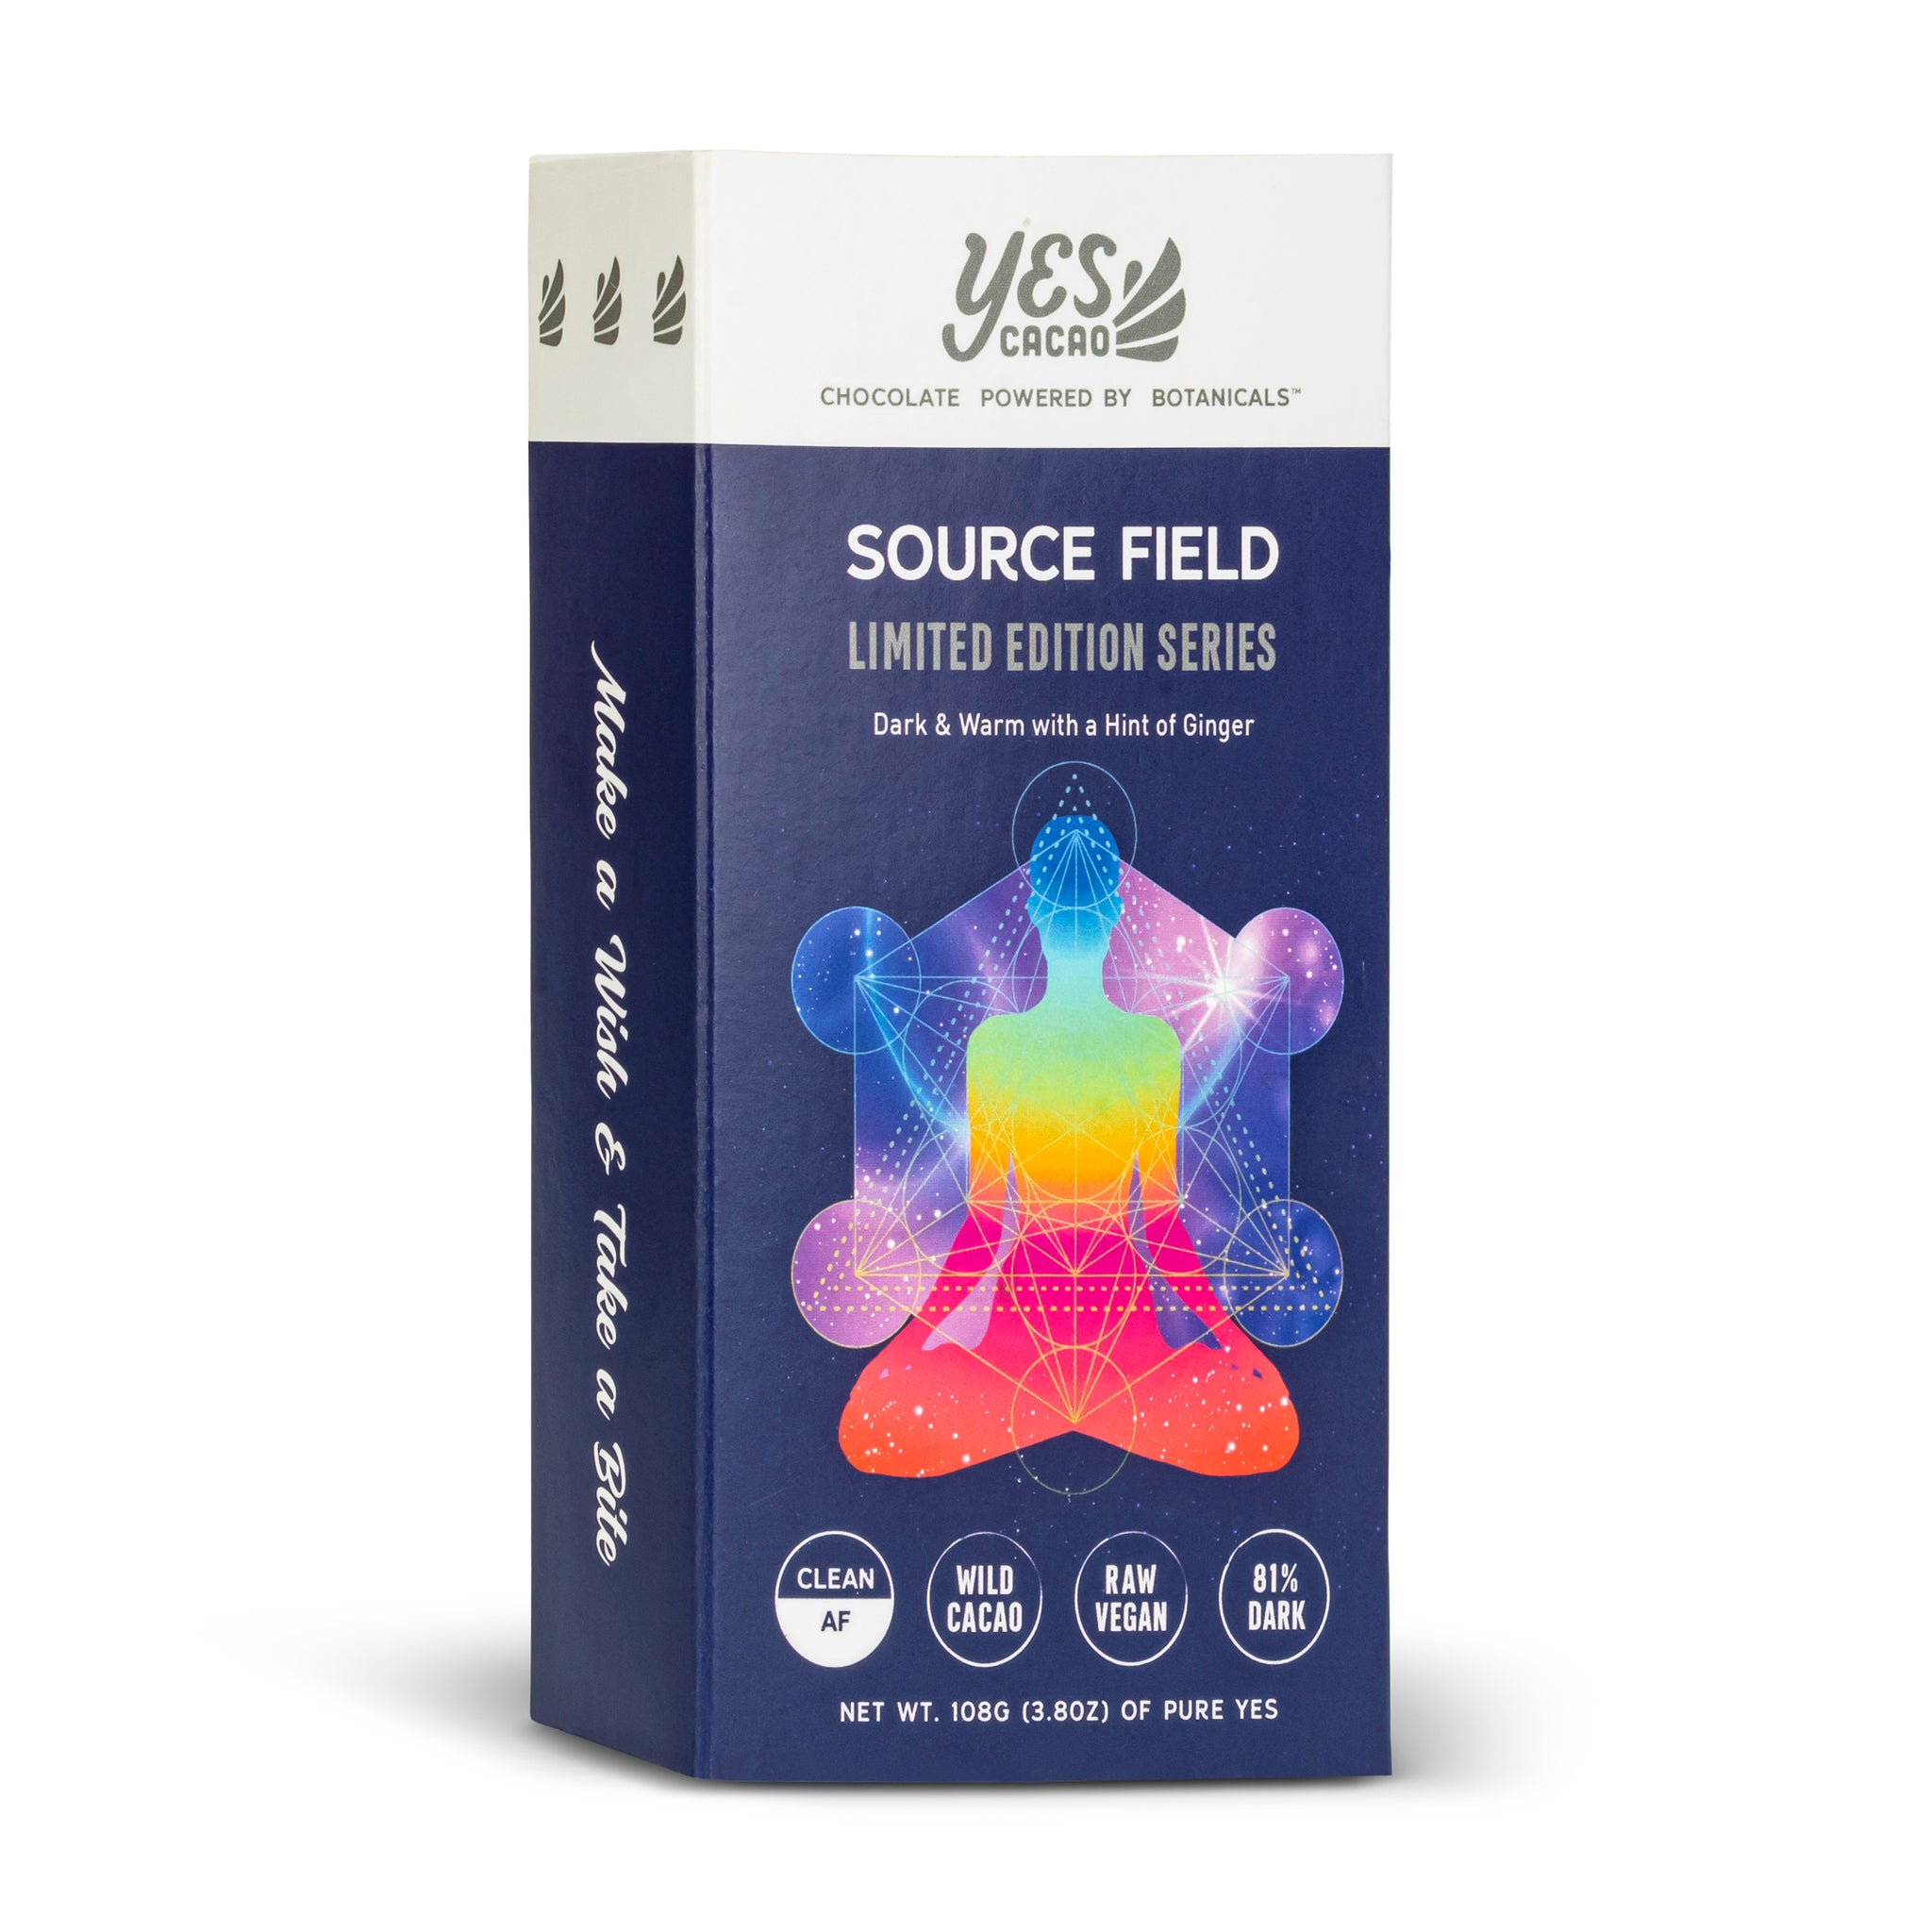 SOURCE FIELD Limited Edition